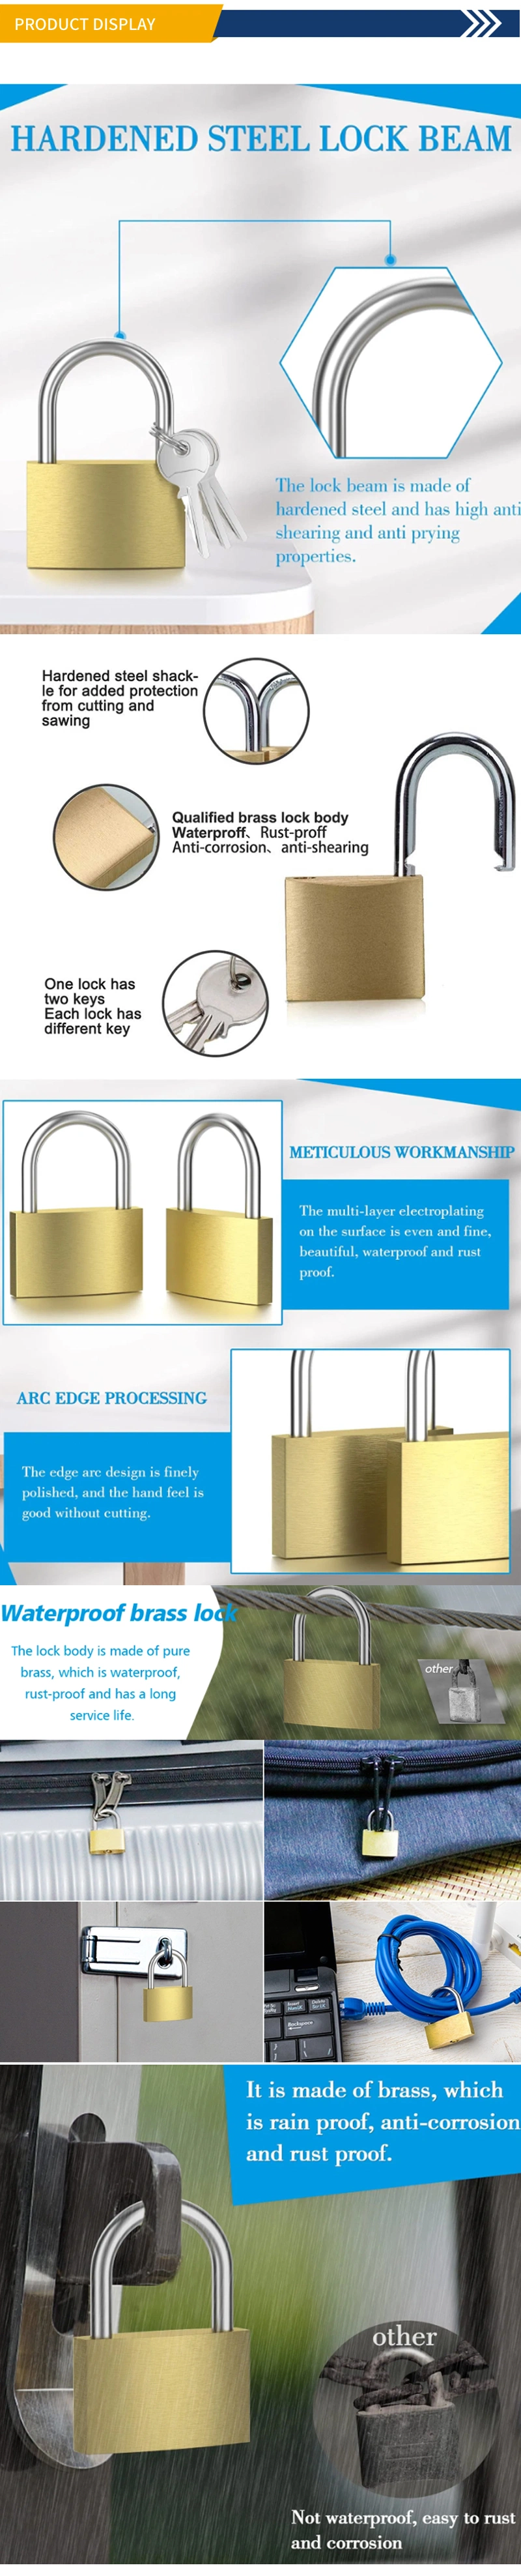 European Standard Brass Padlock with Series From 25mm to 70mm